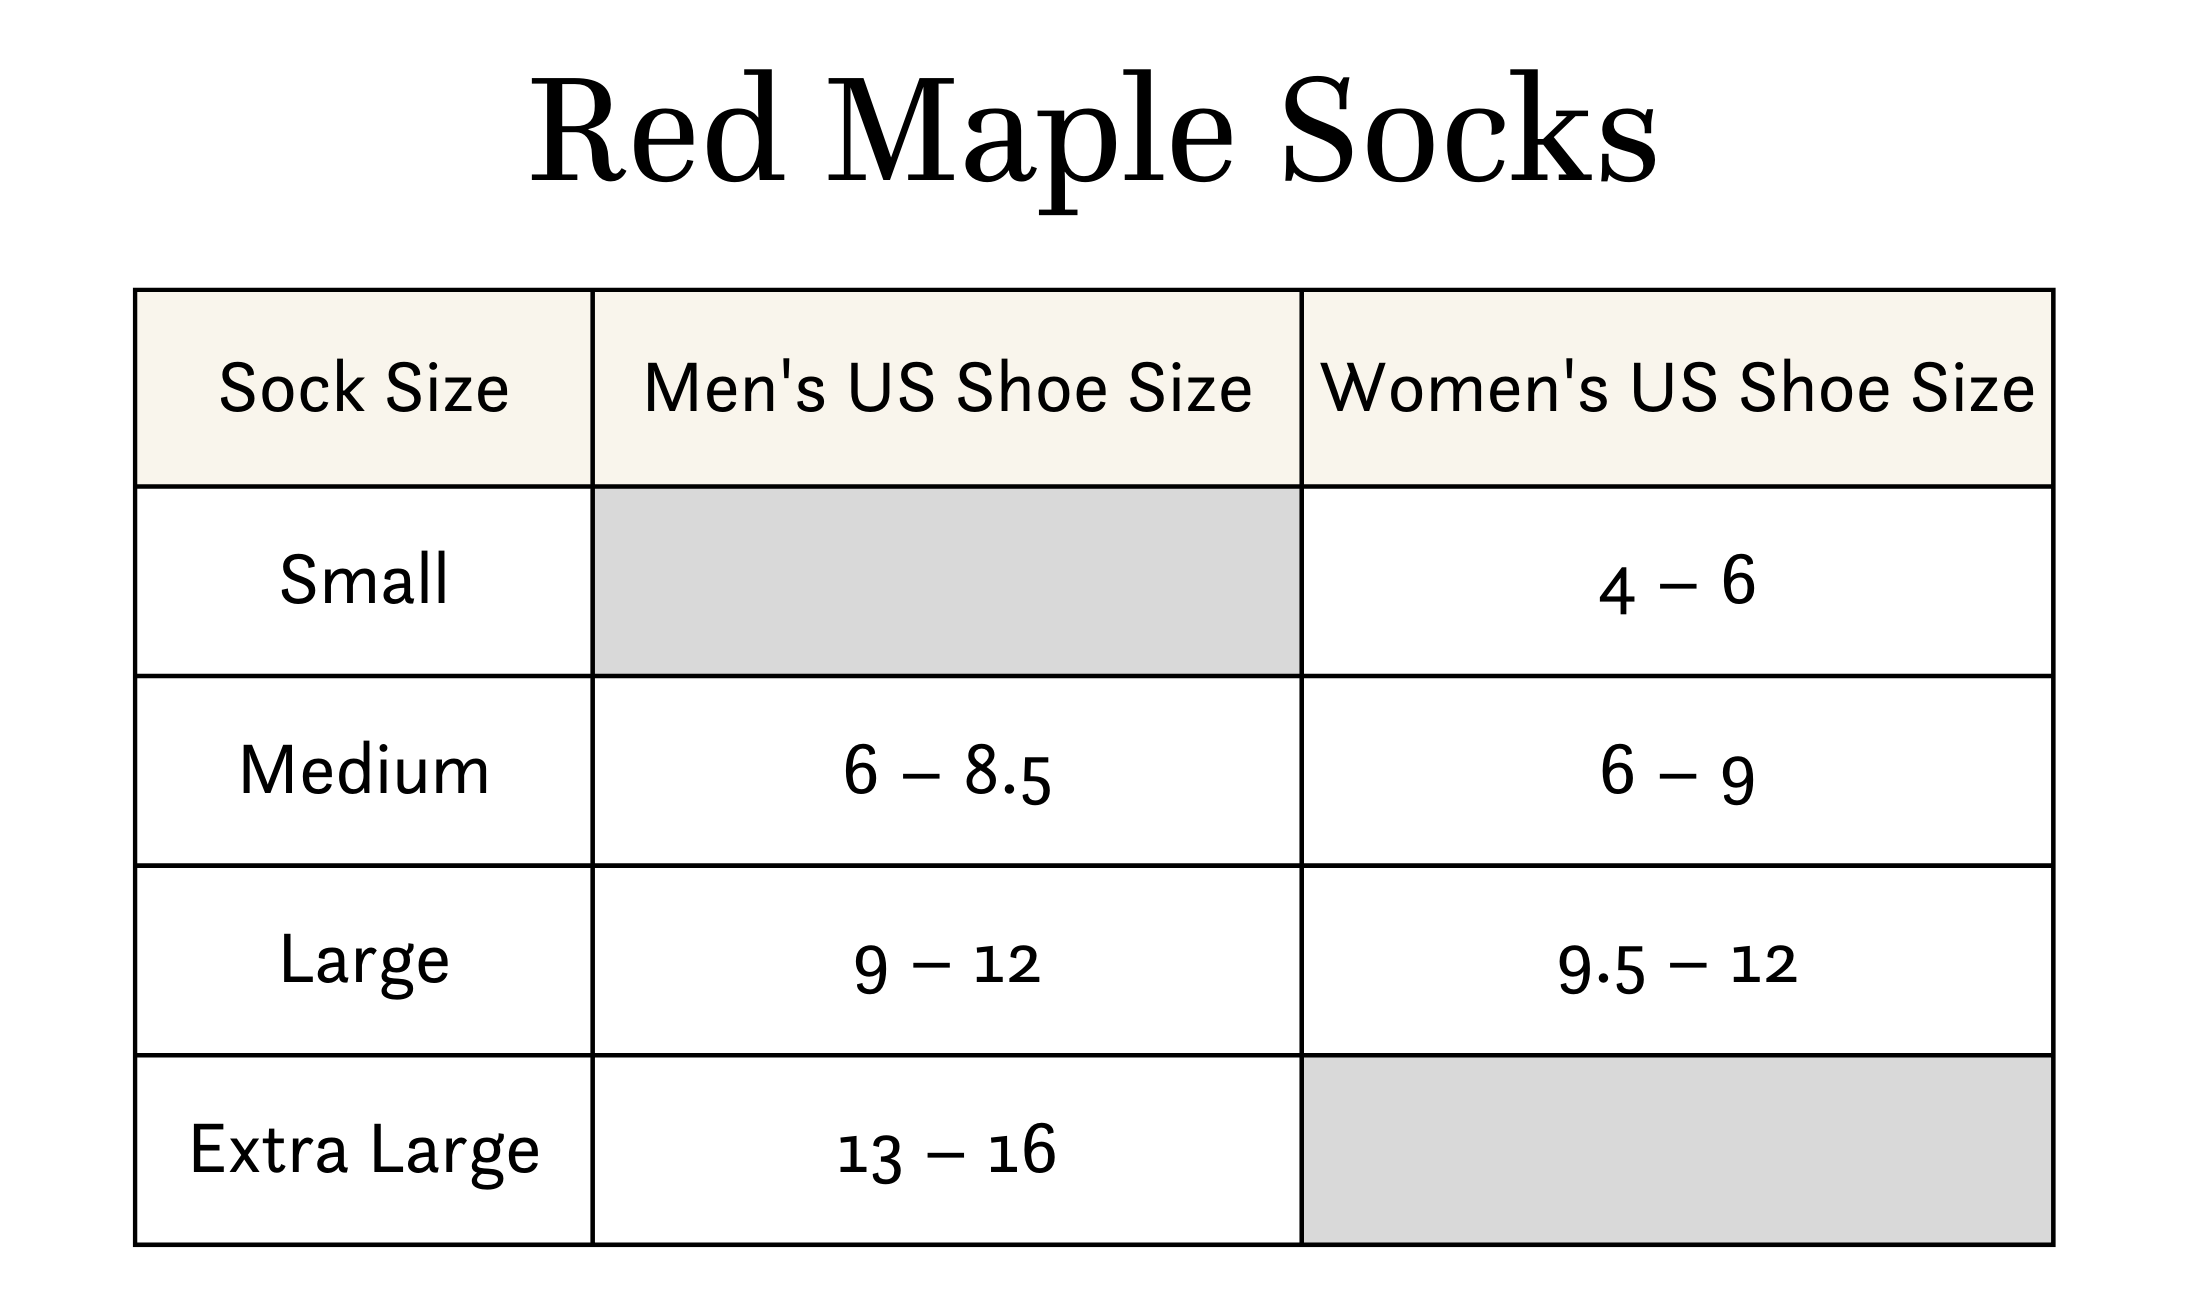 https://cdn.shopify.com/s/files/1/0011/6165/8421/files/Red_Maple_Socks_Size_Chart_5_x_3_in_700_x_420_px.png?v=1675028290